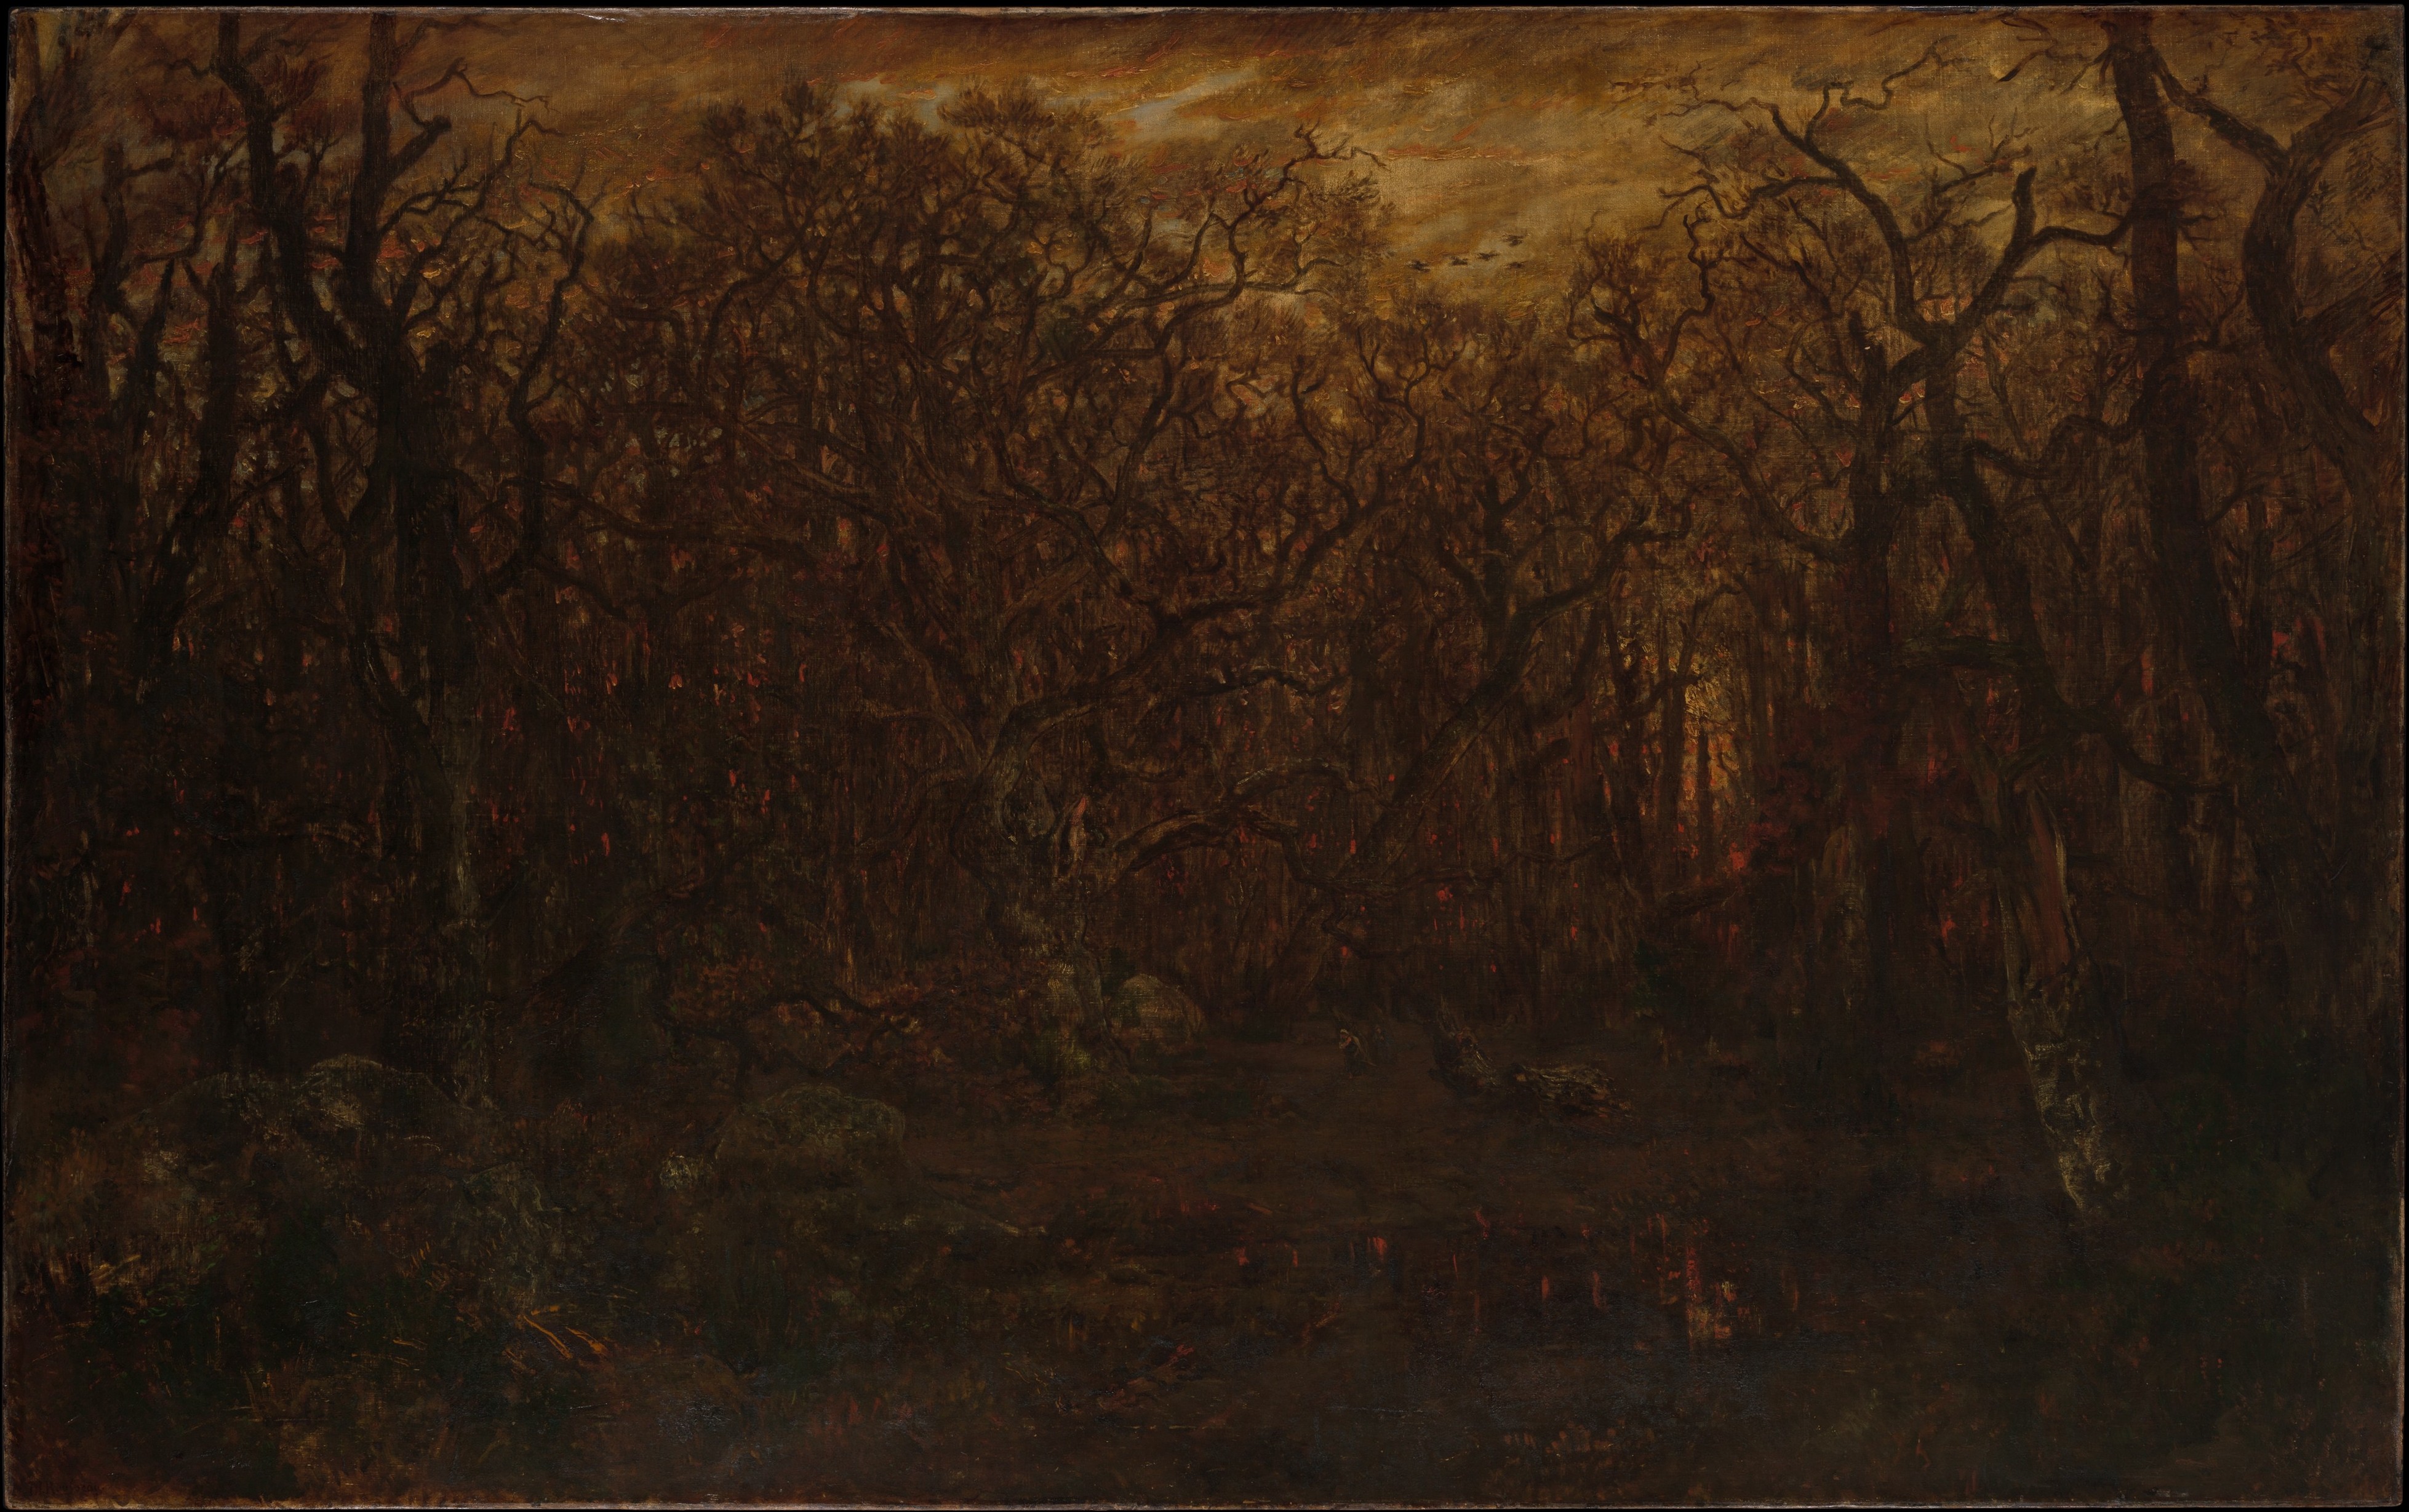 Somber winter forest scene in amber and black tones